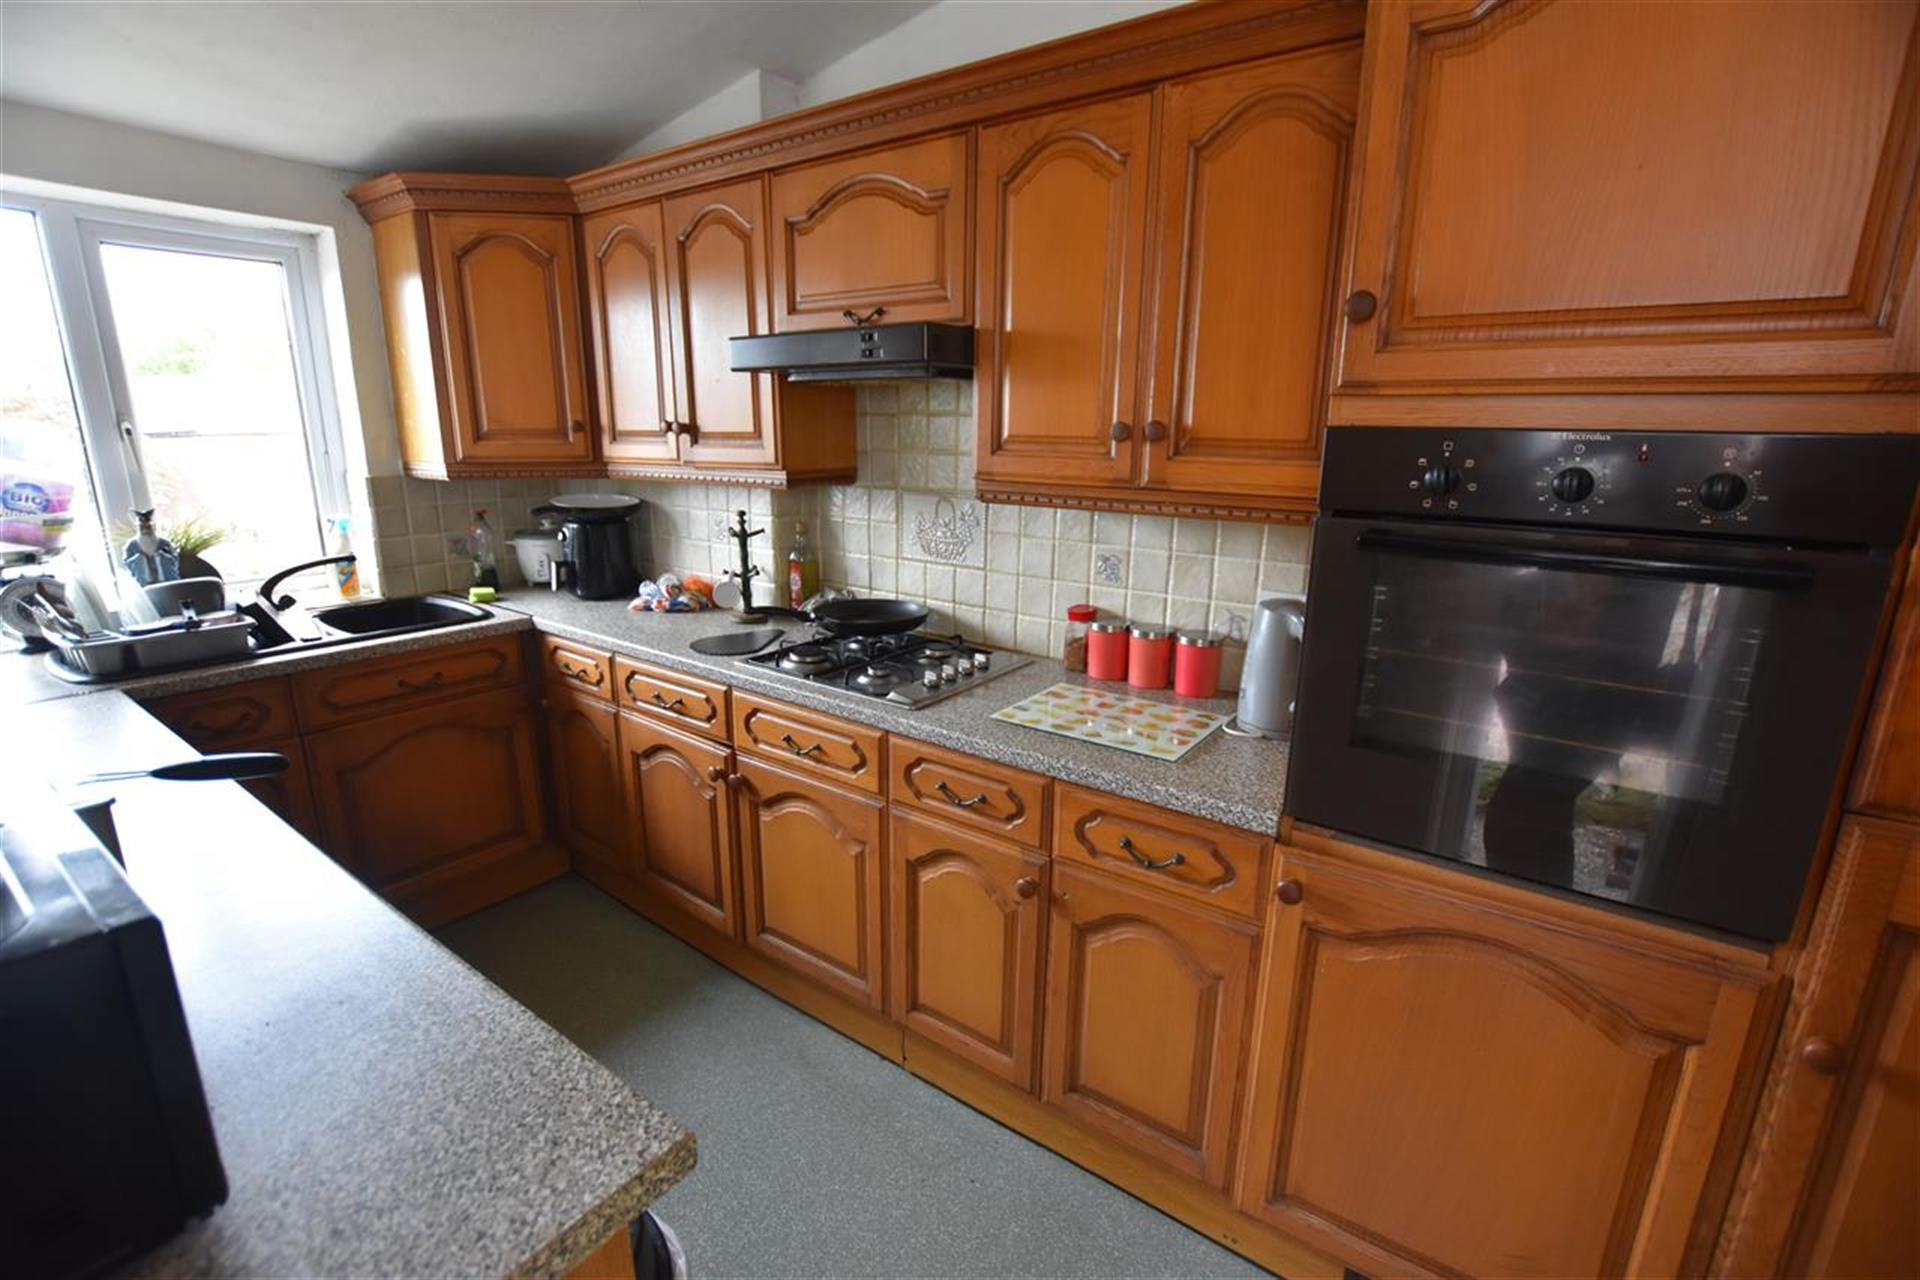 2 Bedroom Terraced House For Sale - Kitchen